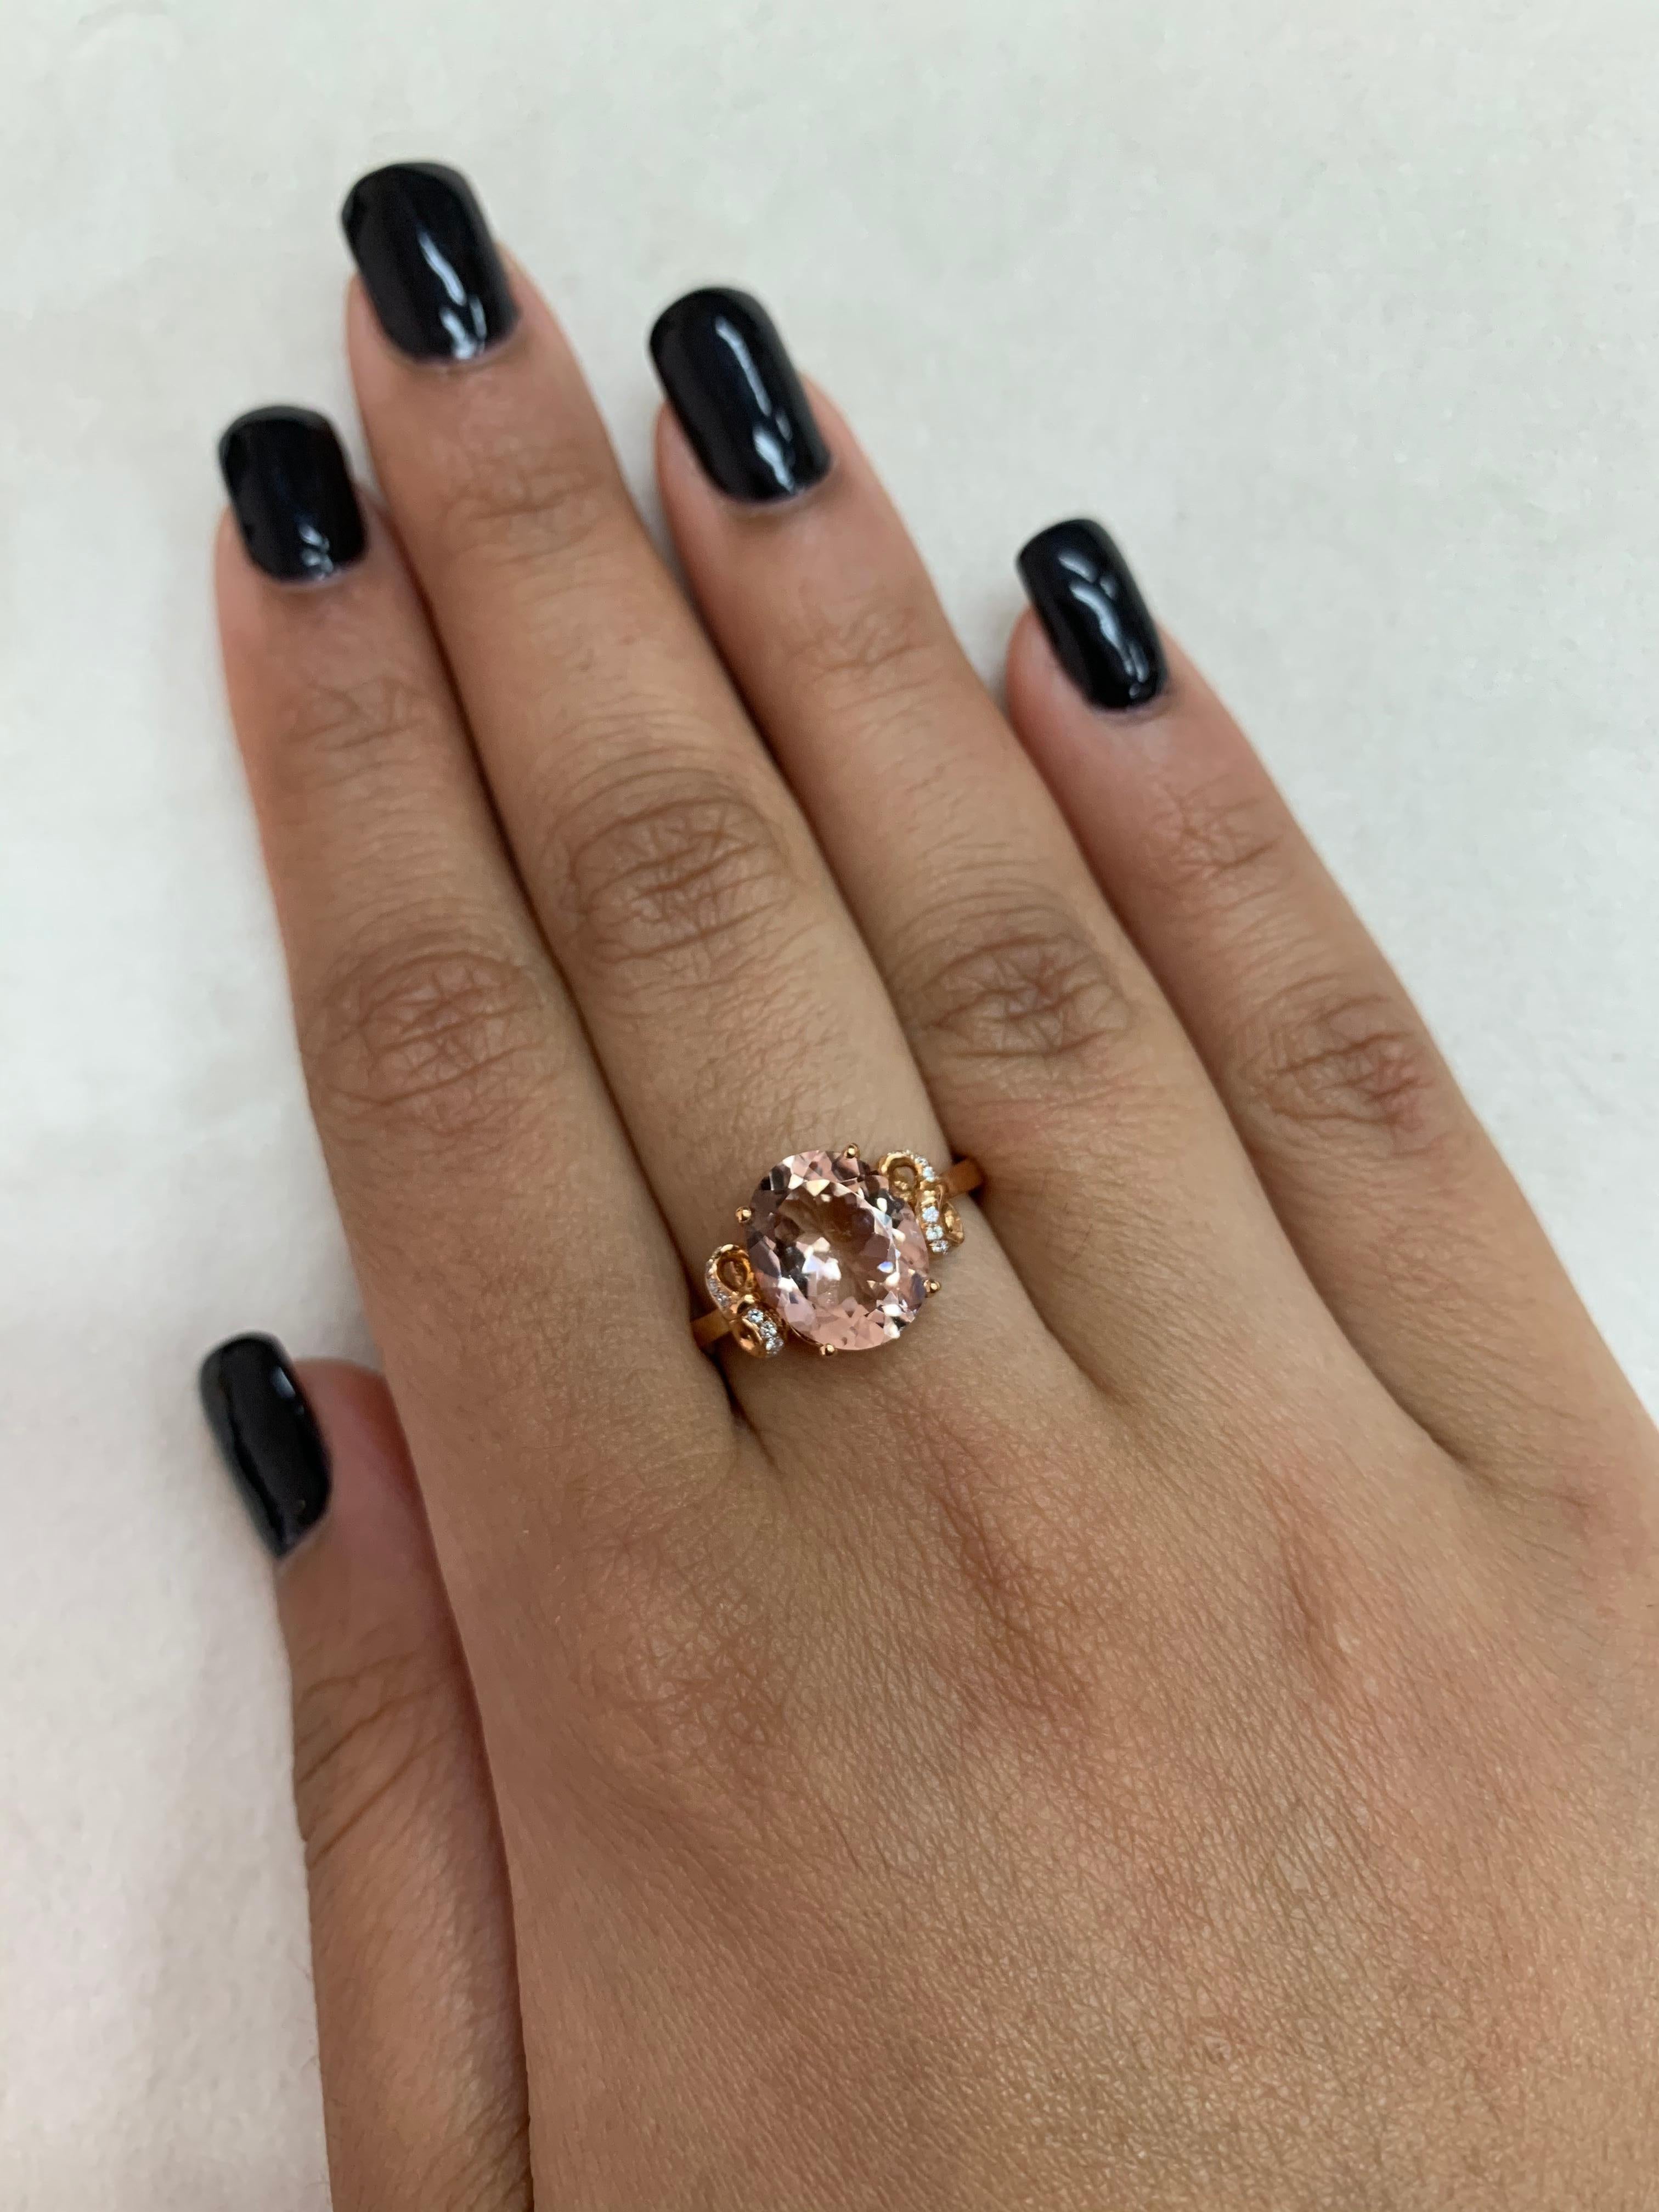 This collection features an array of magnificent morganites! Accented with diamonds these rings are made in rose gold and present a classic yet elegant look. 

Classic morganite ring in 18K rose gold with diamonds. 

Morganite: 2.5 carat oval